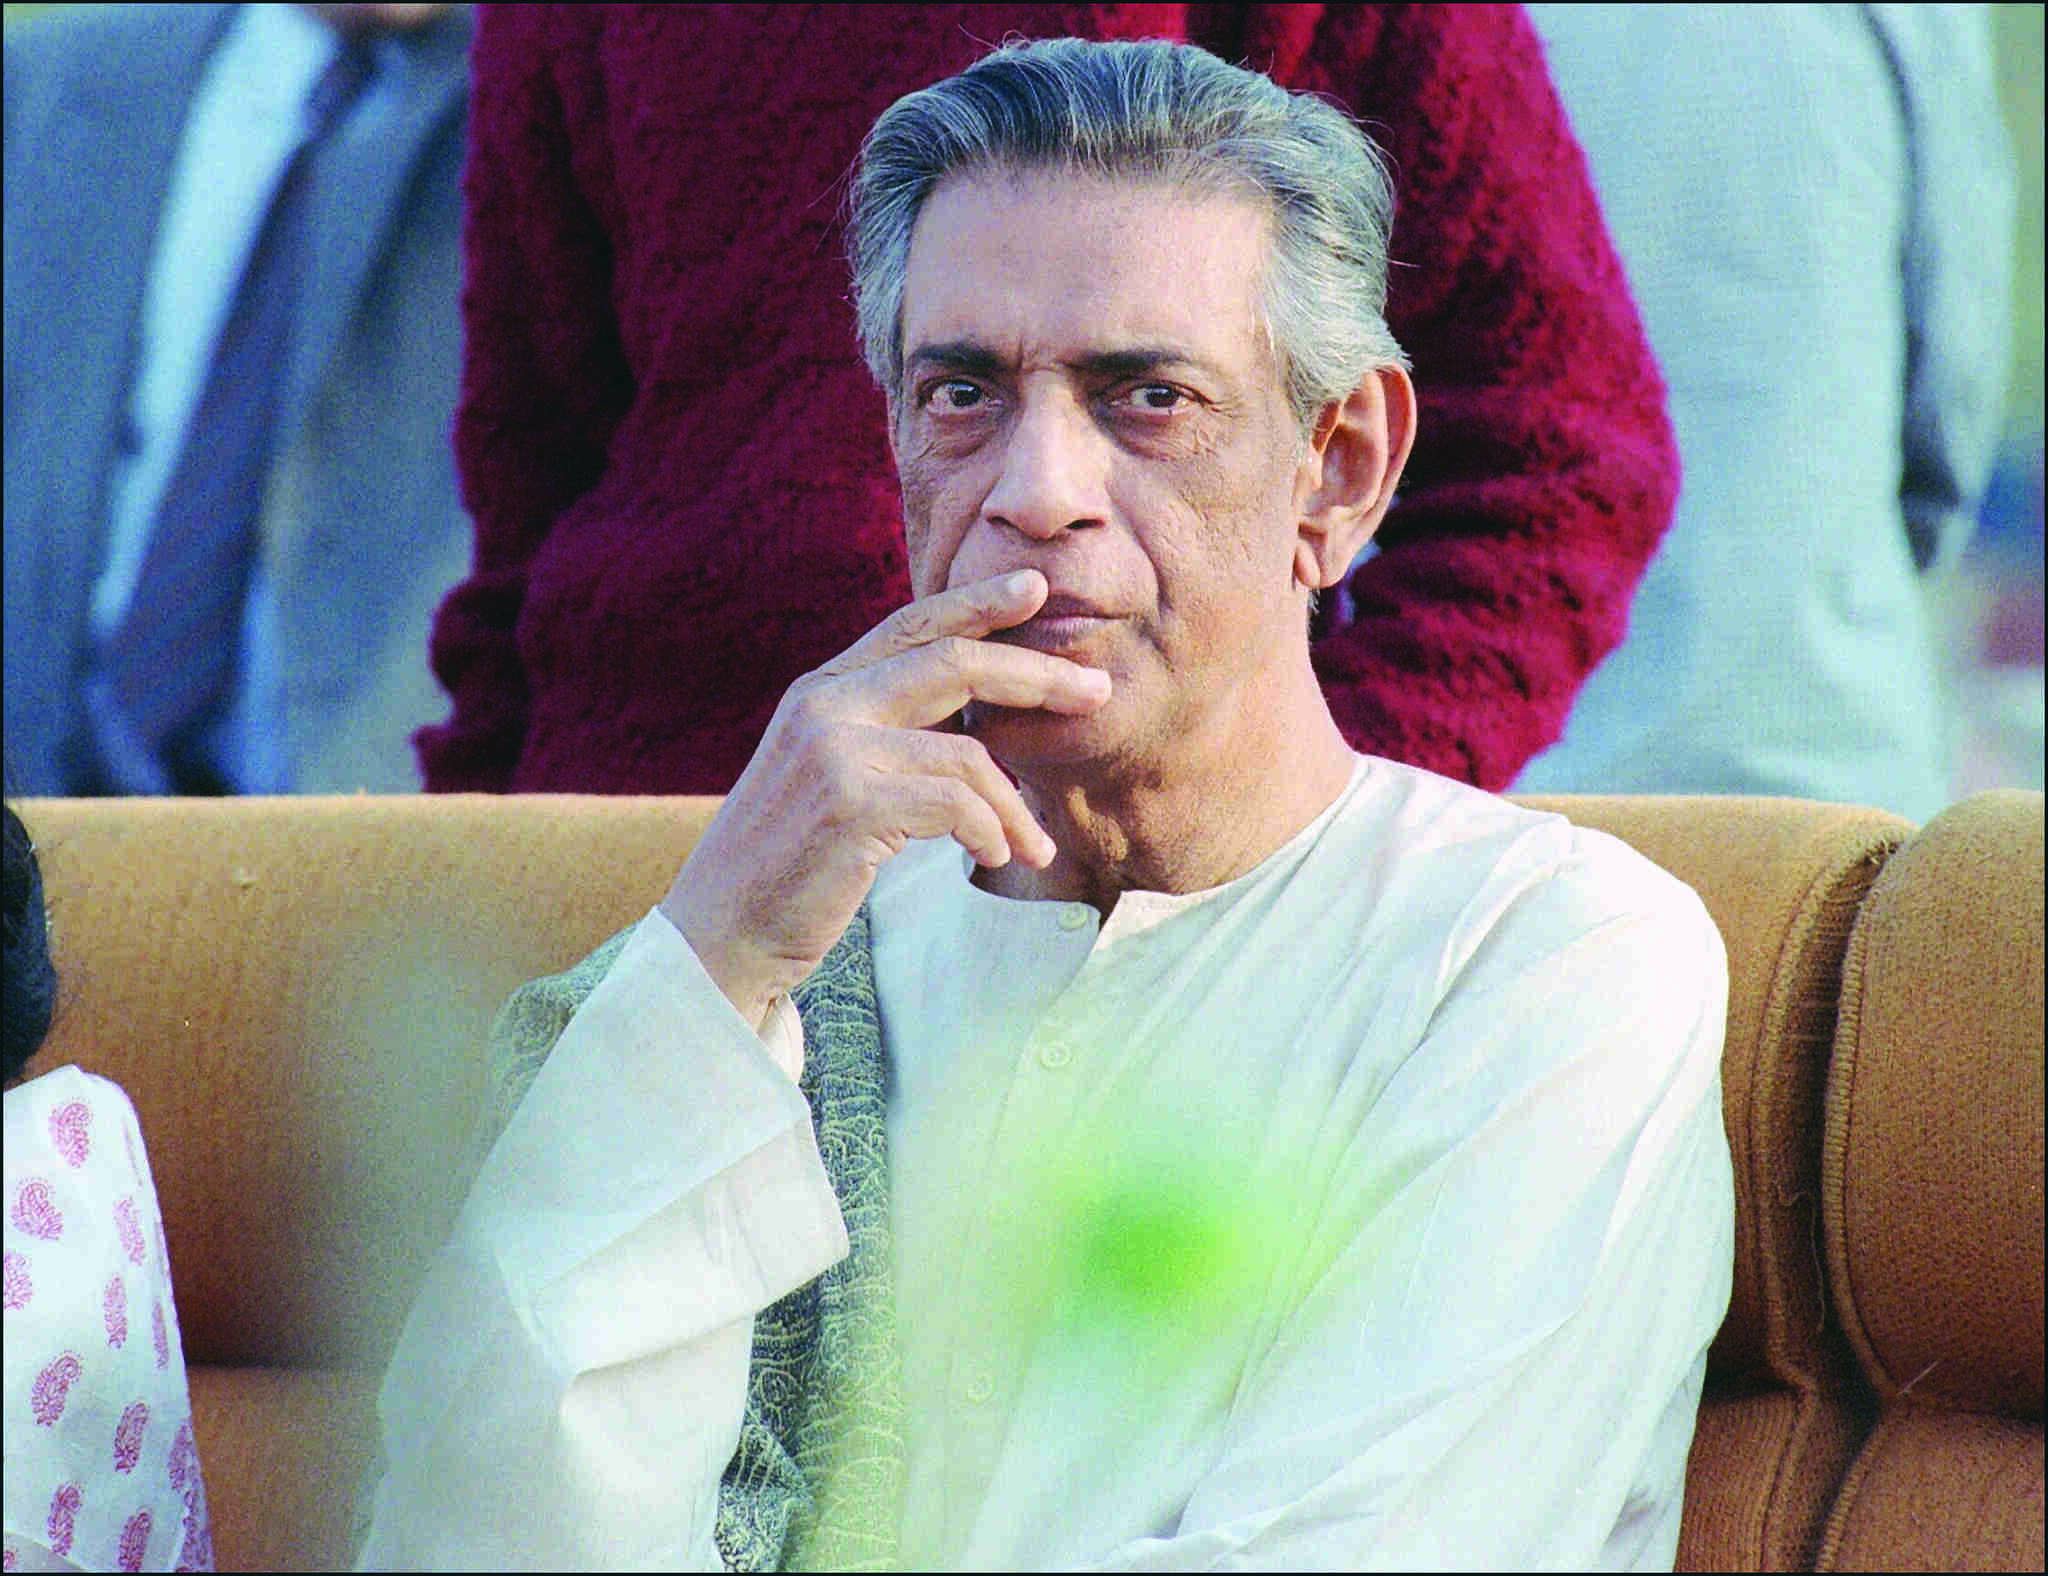 Penguin acquires two new titles of filmmaker Satyajit Ray